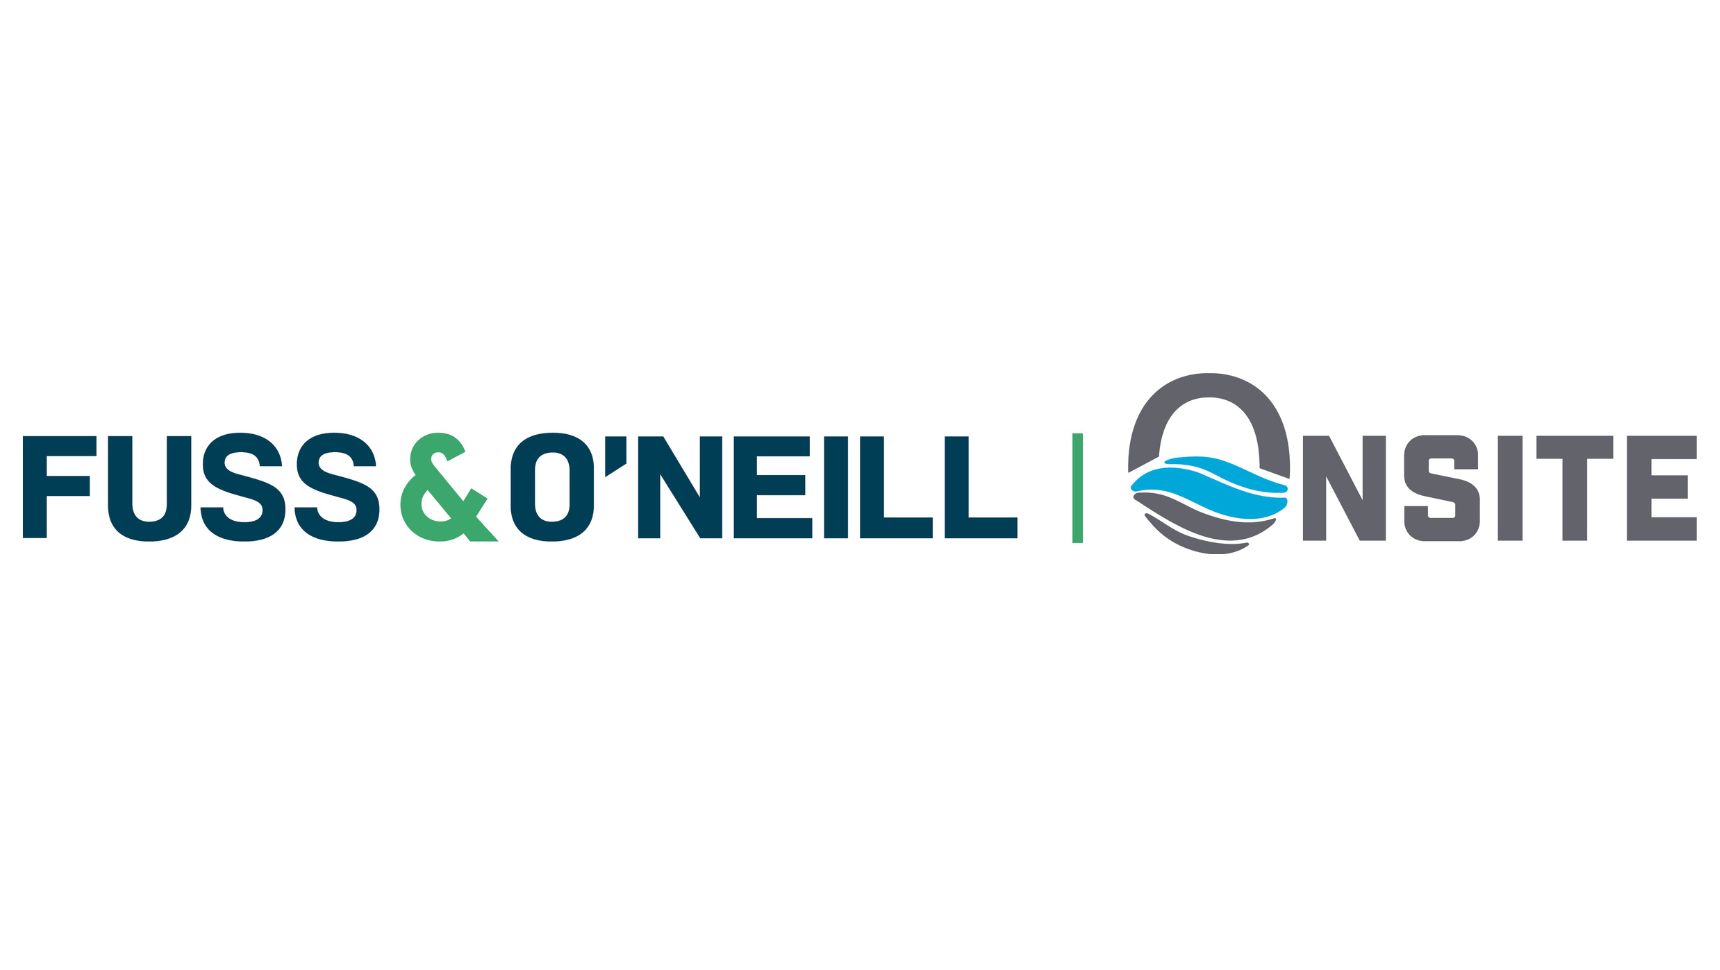 Fuss & O"Neill Acquires Onsite